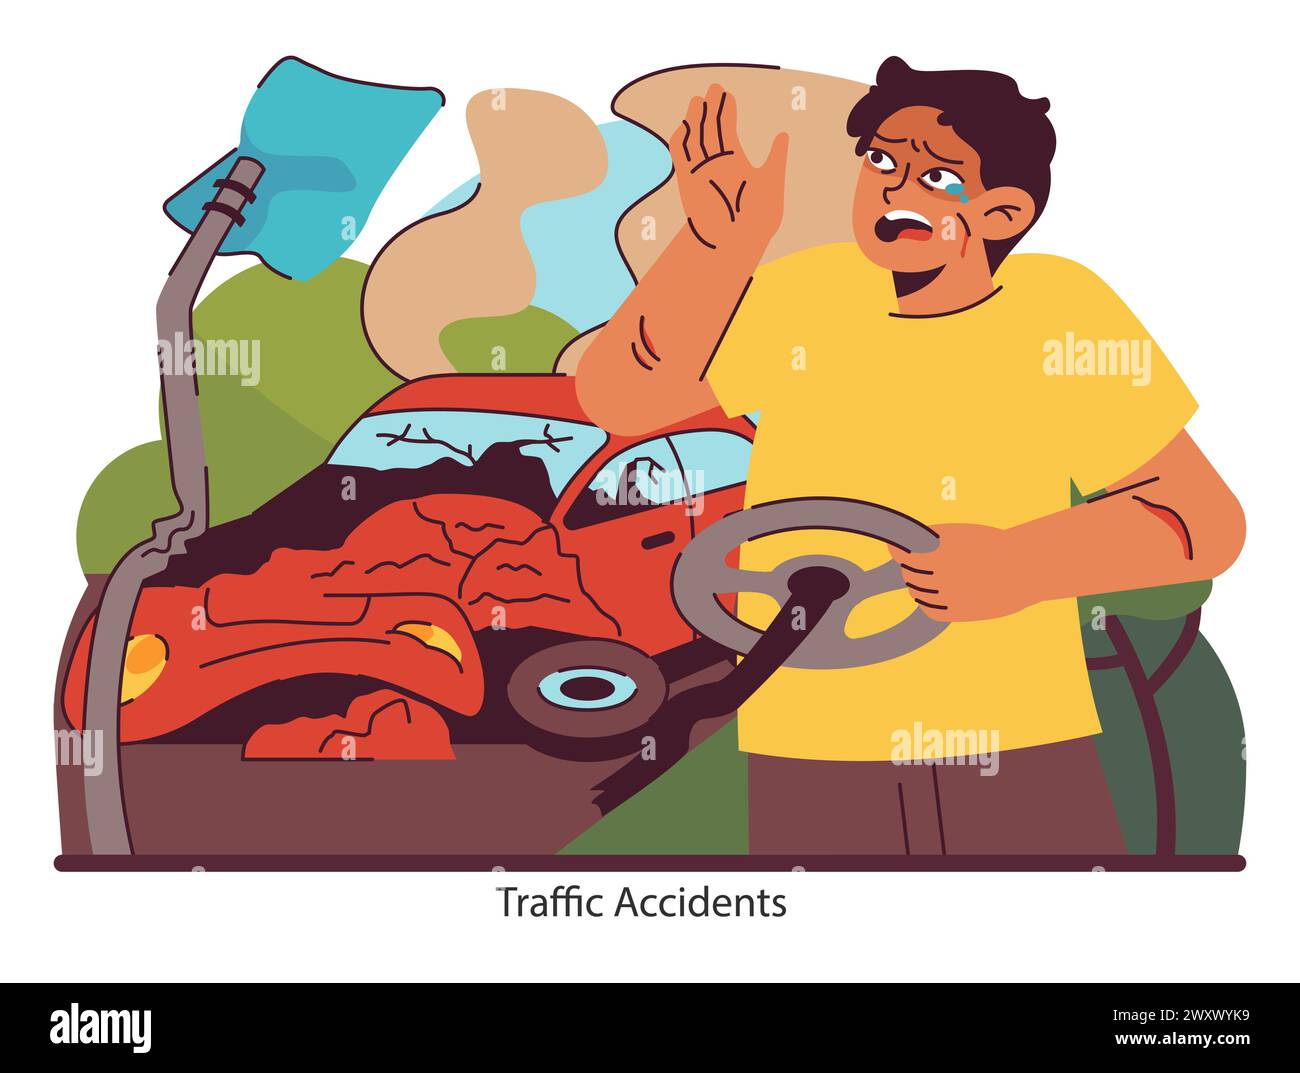 Road safety alert. A vivid illustration capturing the shock and dismay of a car accident, spotlighting the urgency of cautious driving. Flat vector illustration. Stock Vector